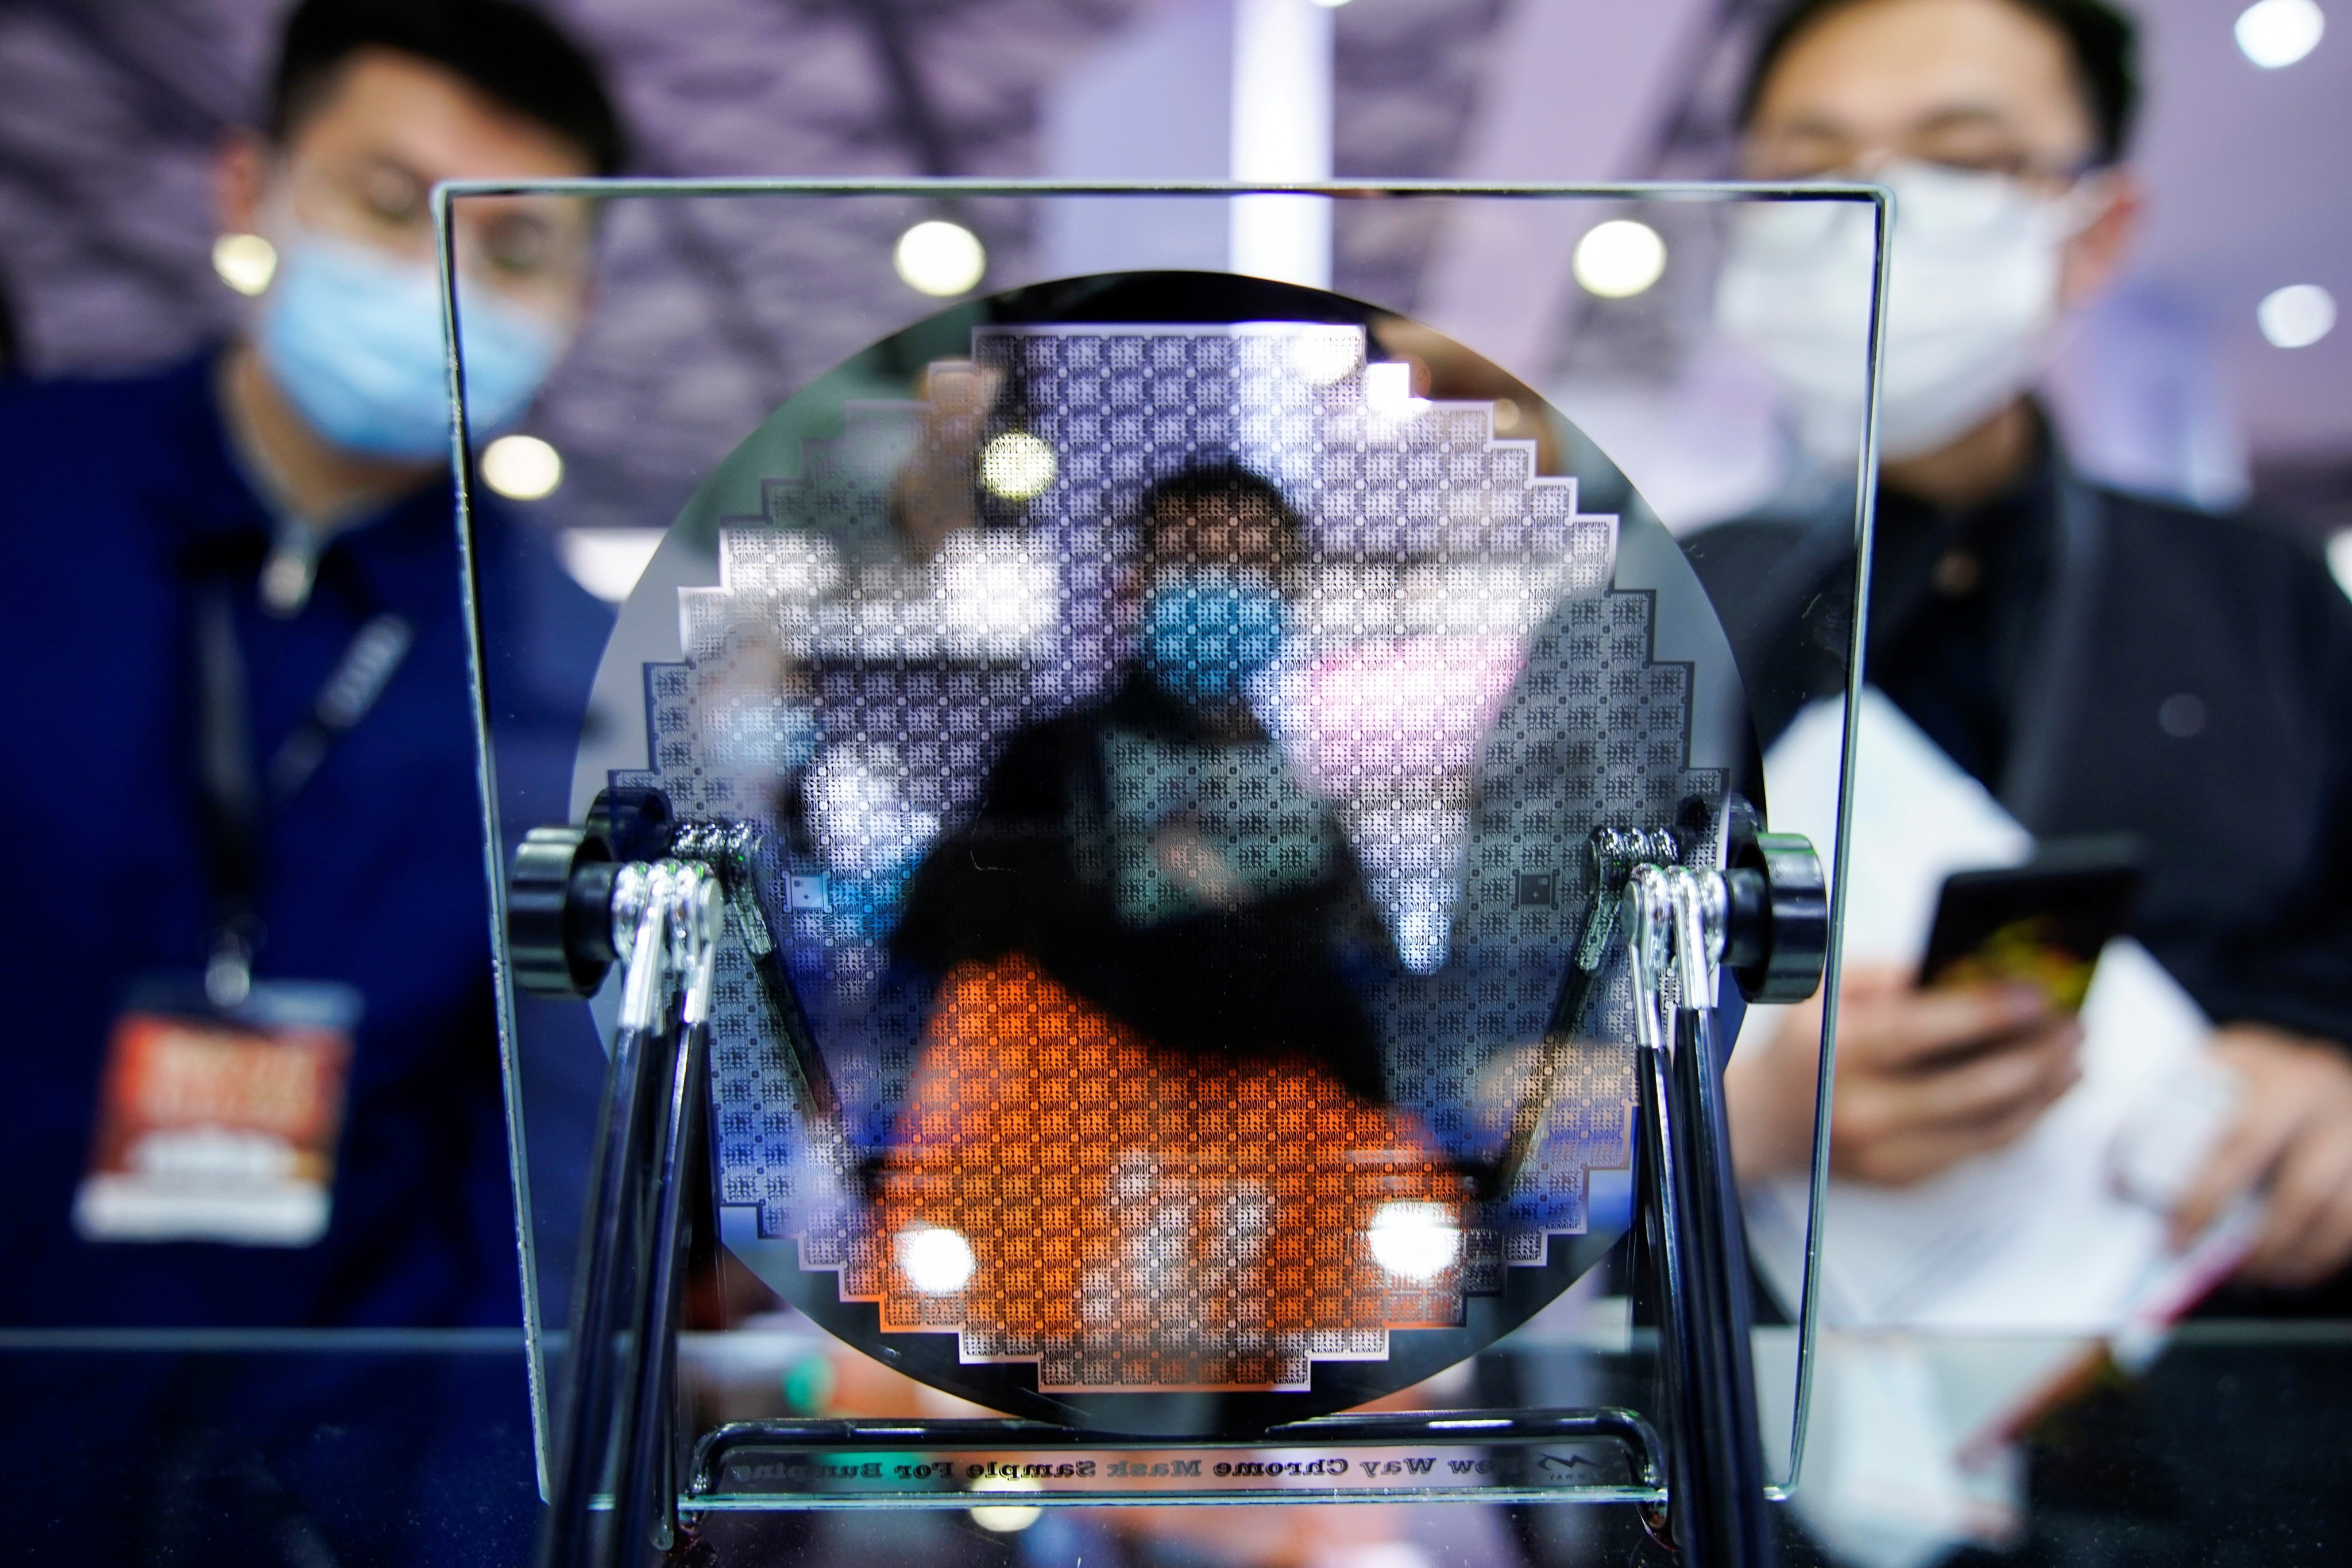 Visitors look at a semiconductor device on display at a trade fair in Shanghai in March 2021. The UK is keen to expand its presence in the chip manufacturing sector. Photo: Reuters